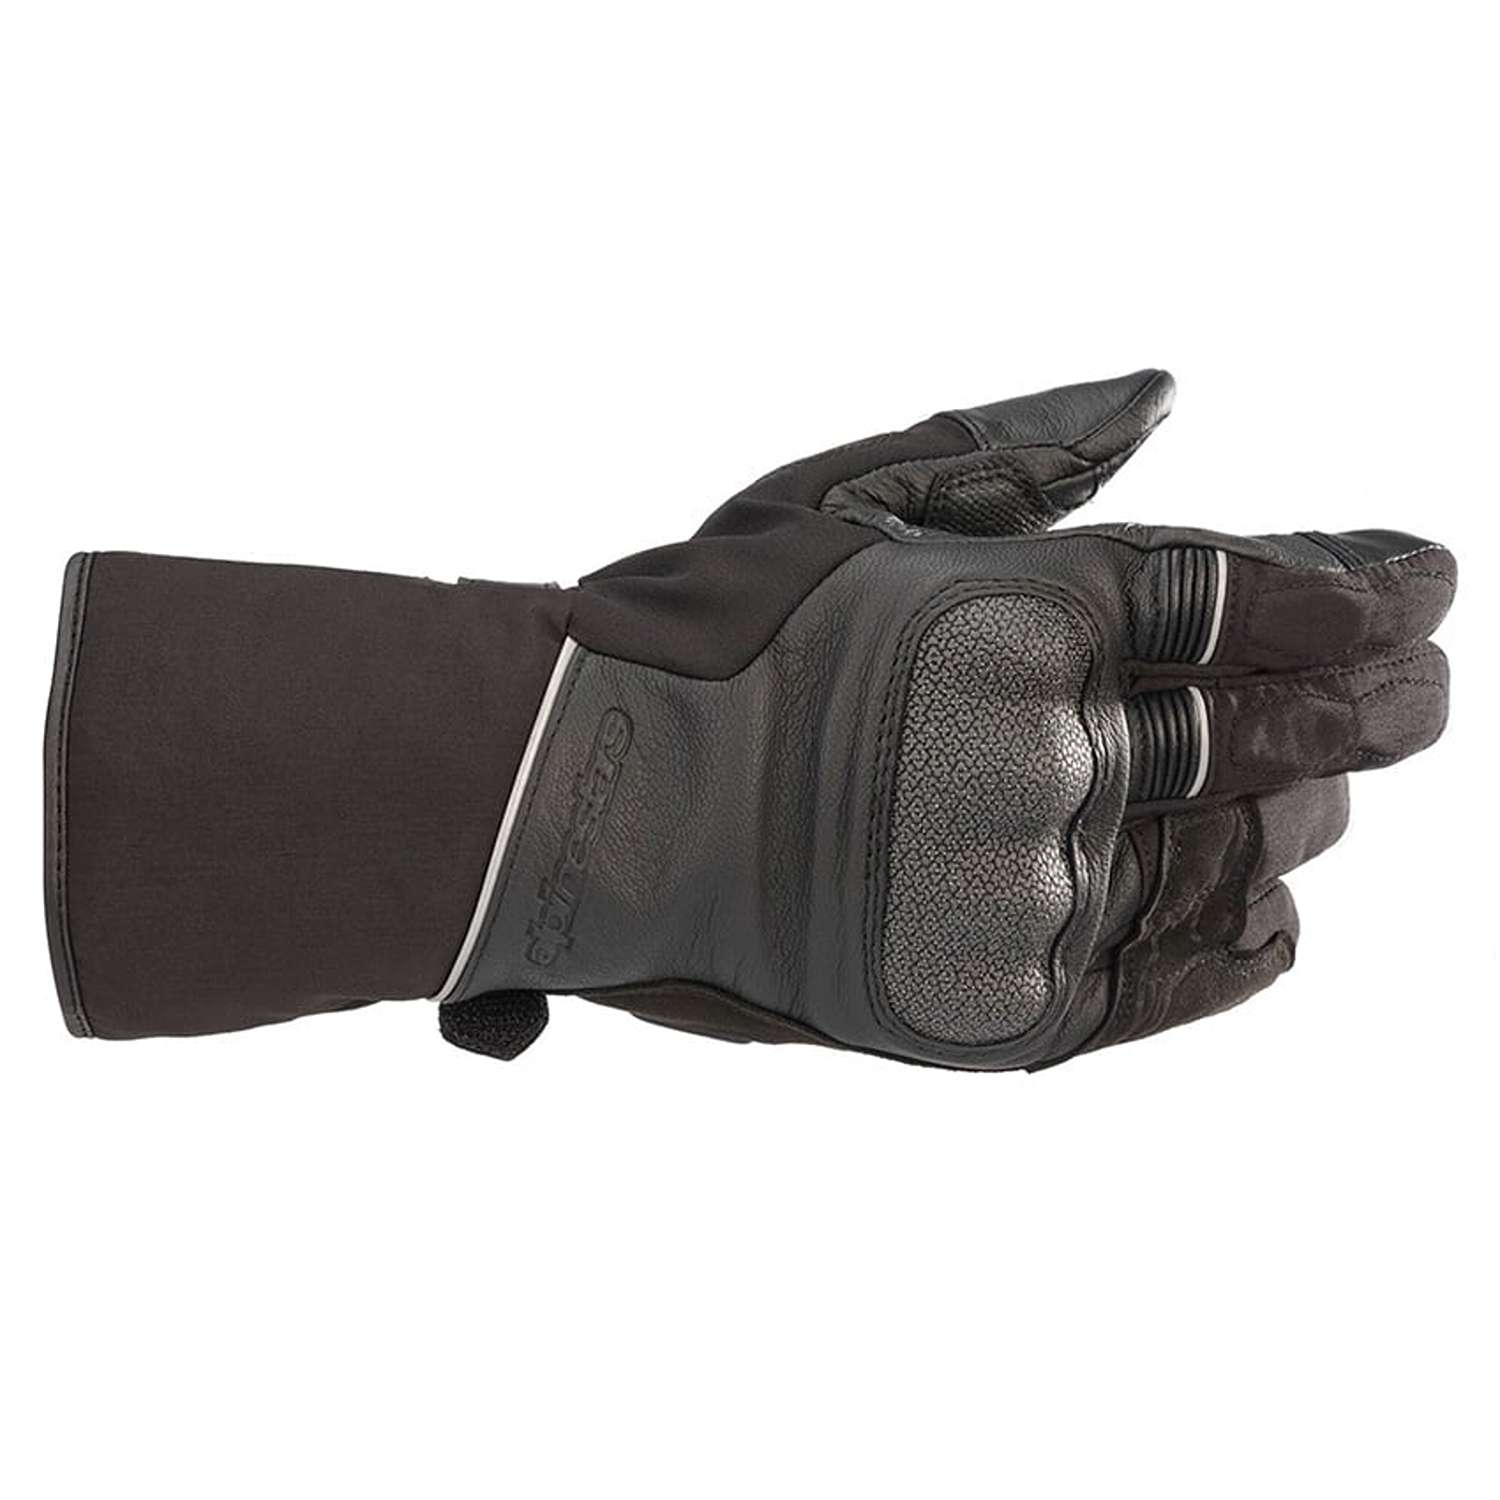 Image of EU Alpinestars Wr-2 V2 Gore-Tex Gloves With Gore Grip Technology Black Taille XL